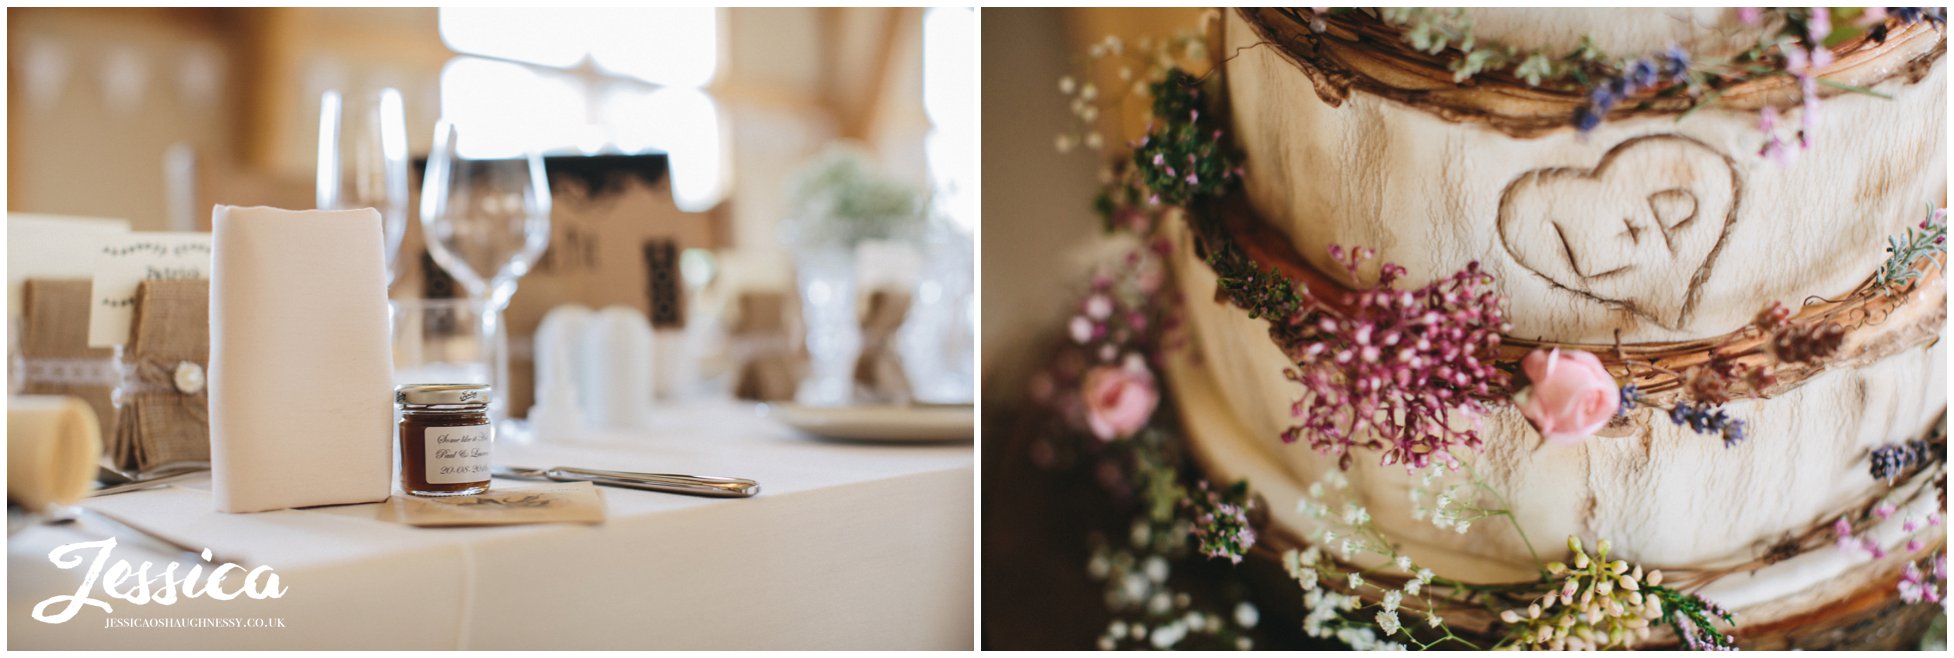 close up of rustic wedding details at a north wales wedding